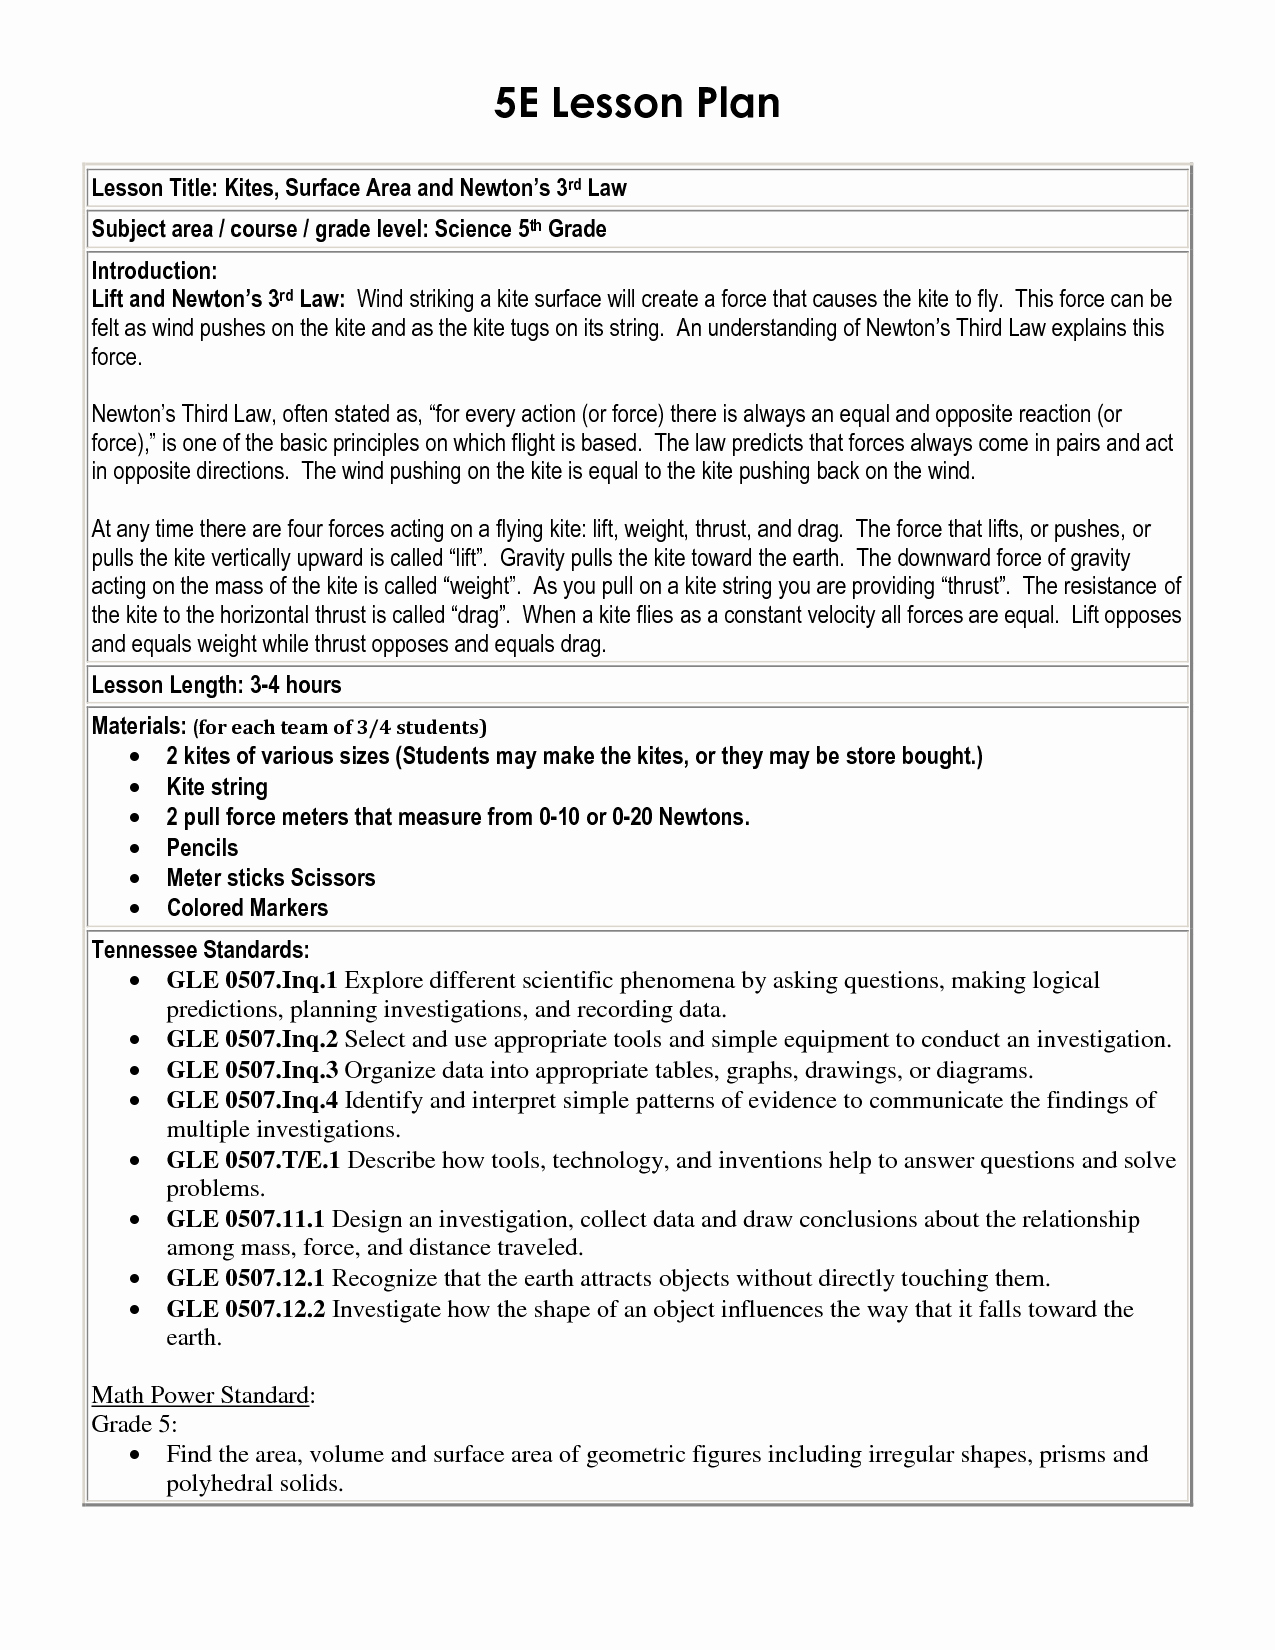 Science Lesson Plan Template Beautiful 5 E Lesson Plan Template